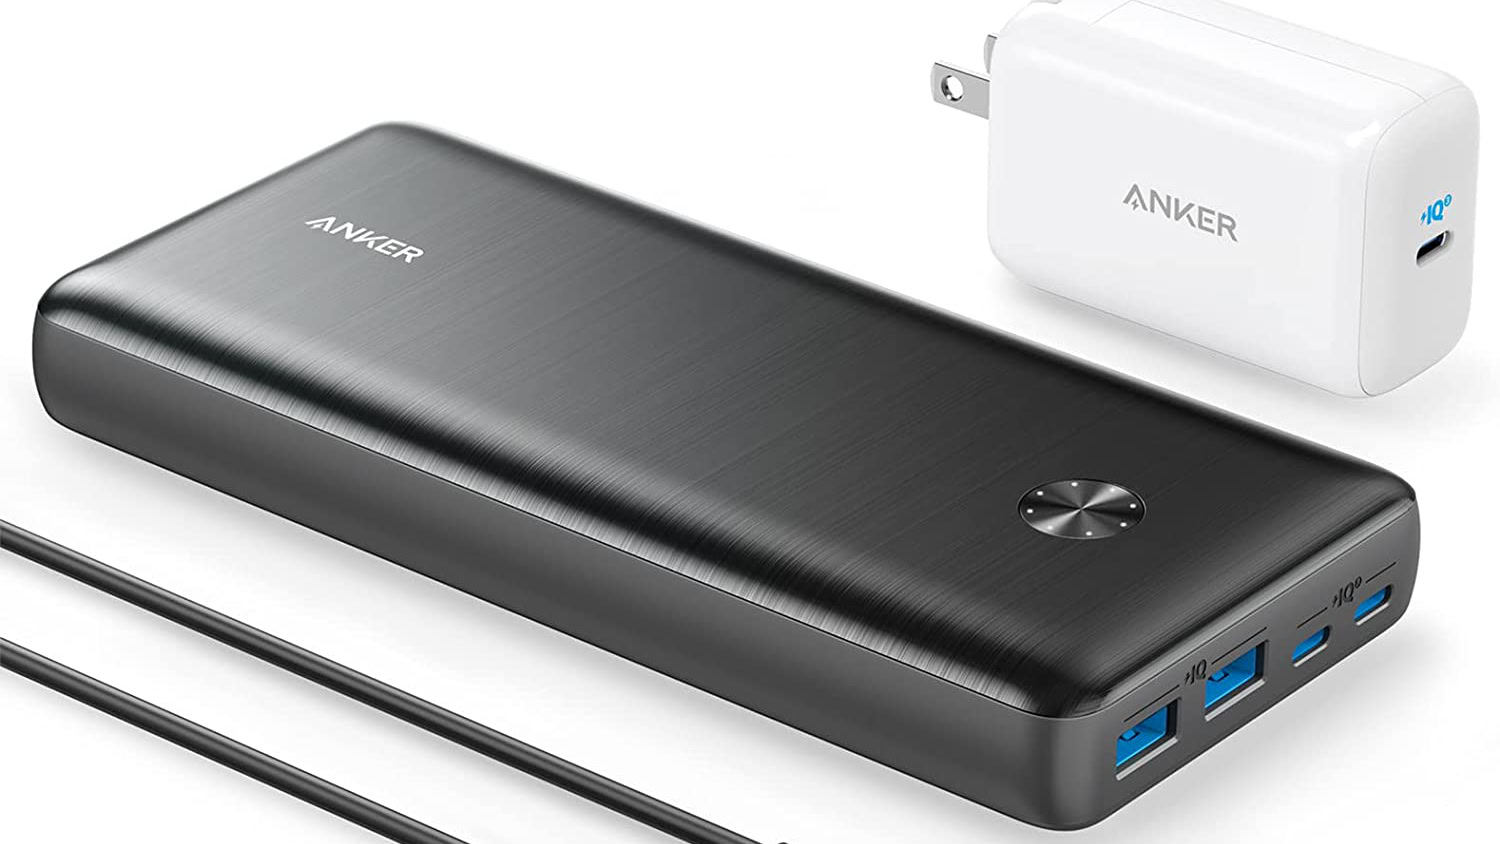 The capacity portable chargers up to 50,000mAh